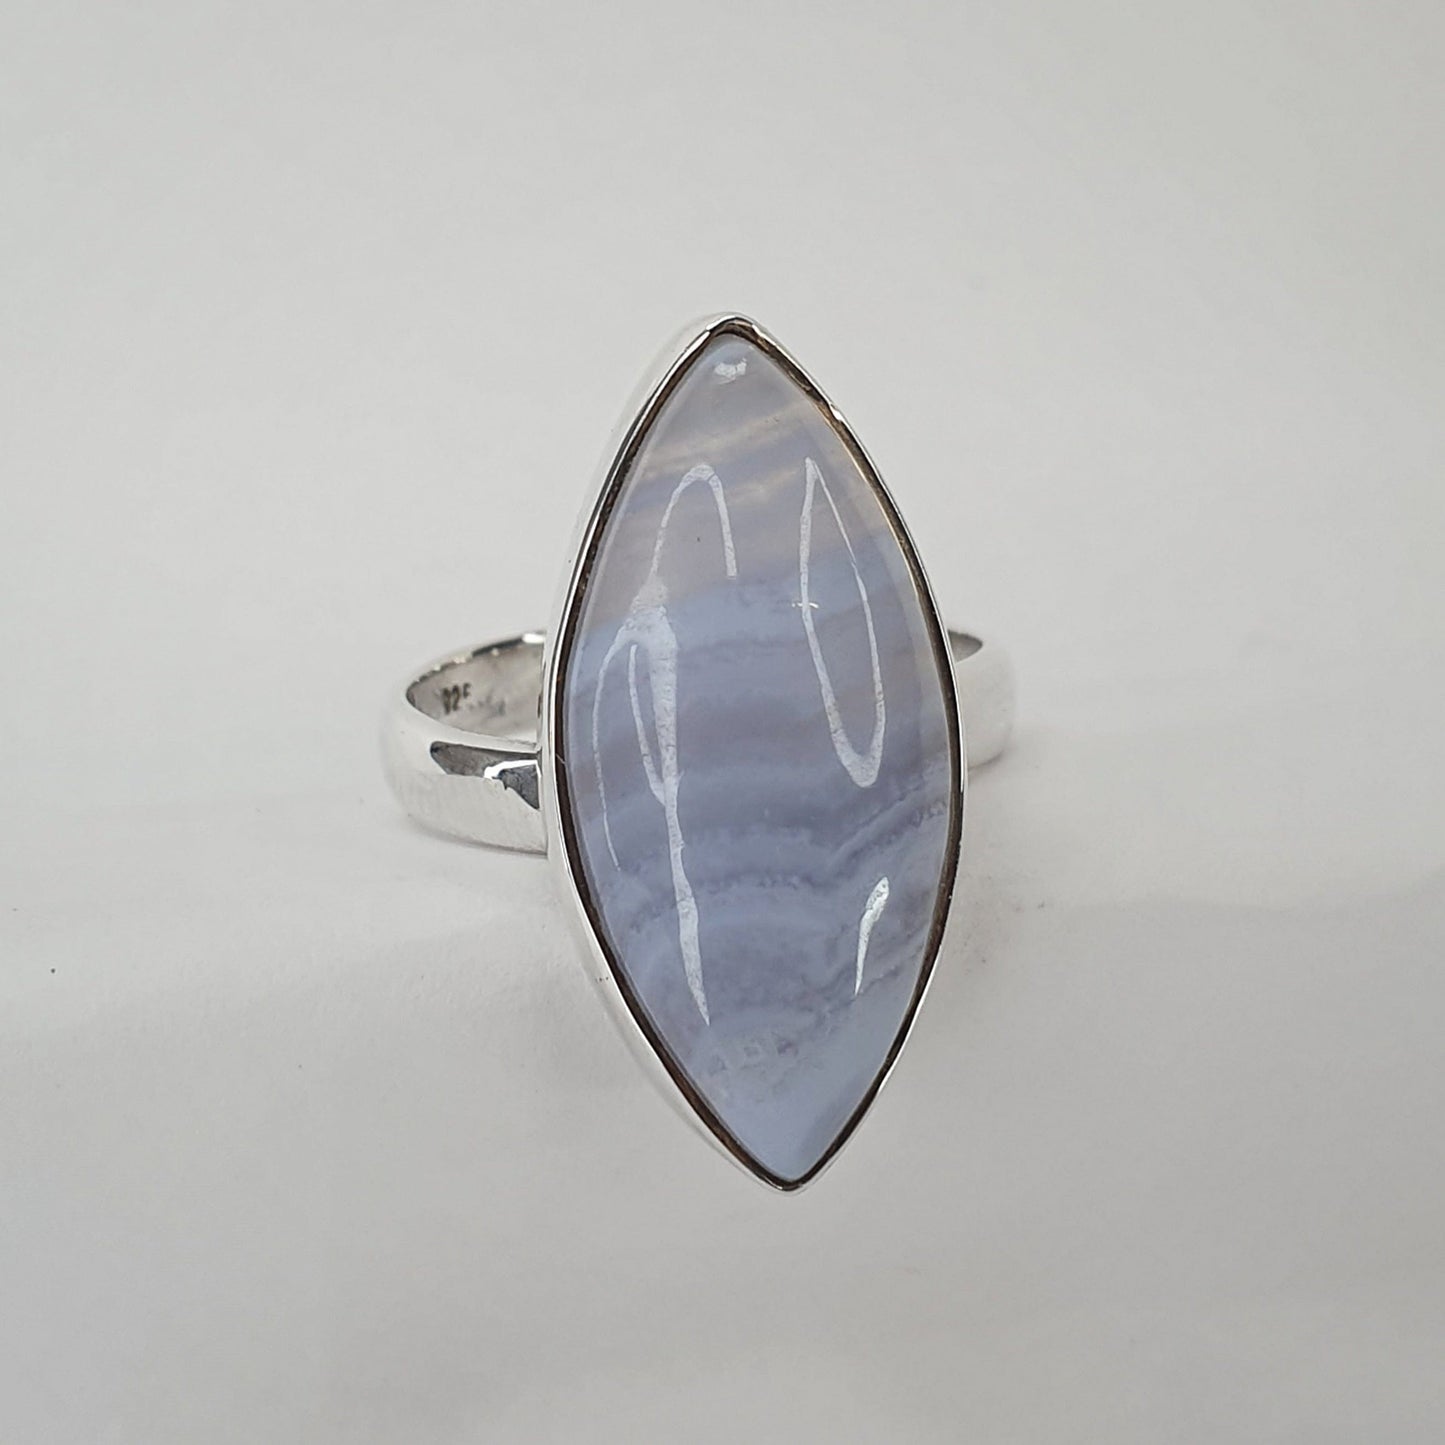 Blue Lace Agate Ring - Size 9 (jx212)